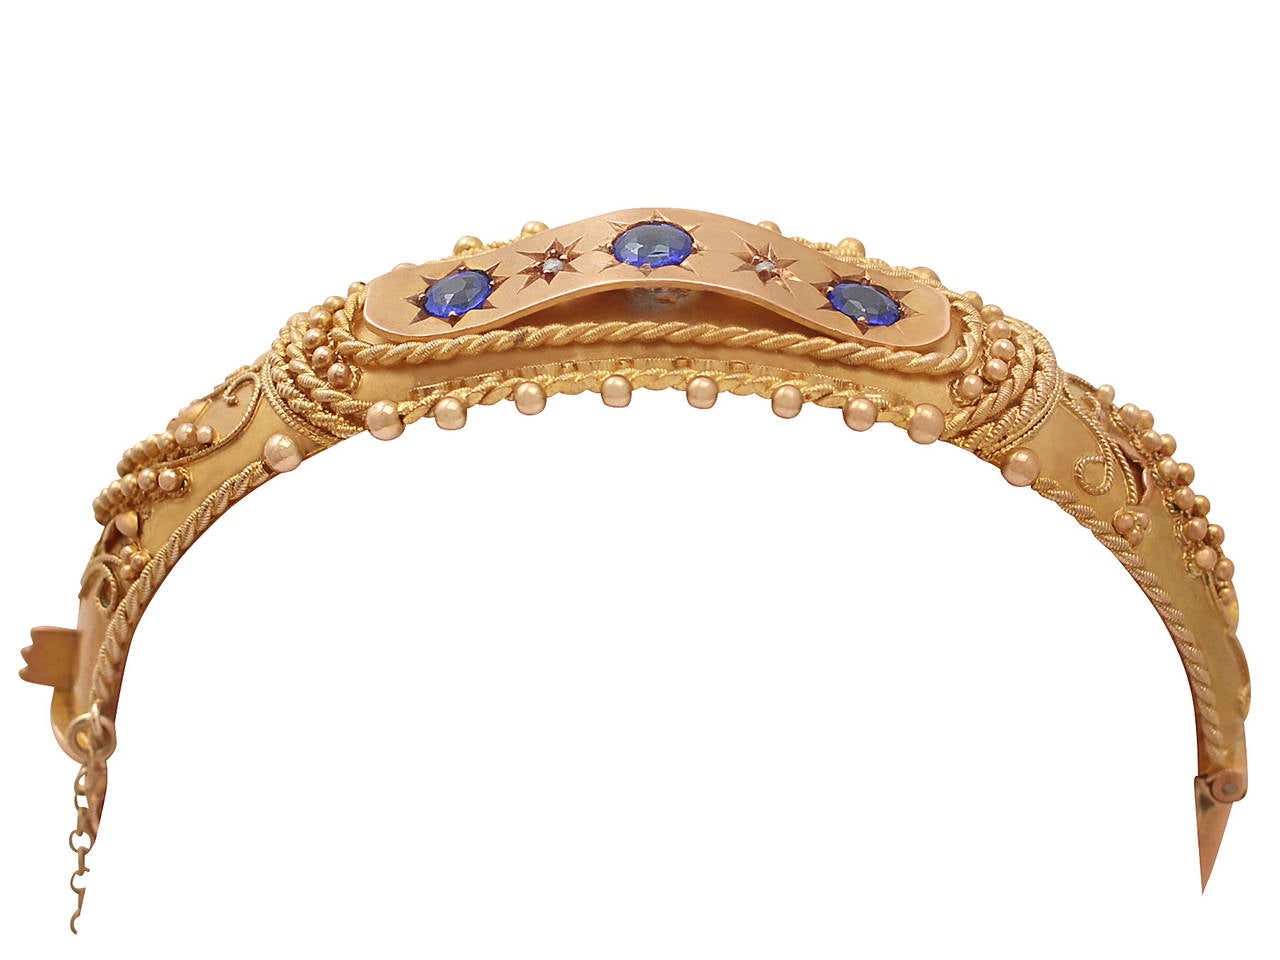 An impressive George V garnet doublet and diamond, 9 karat yellow and rose gold bangle; part of our antique jewelry and estate jewelry collections

This impressive antique garnet bangle has been crafted in 9 karat yellow and rose gold.

The hinged